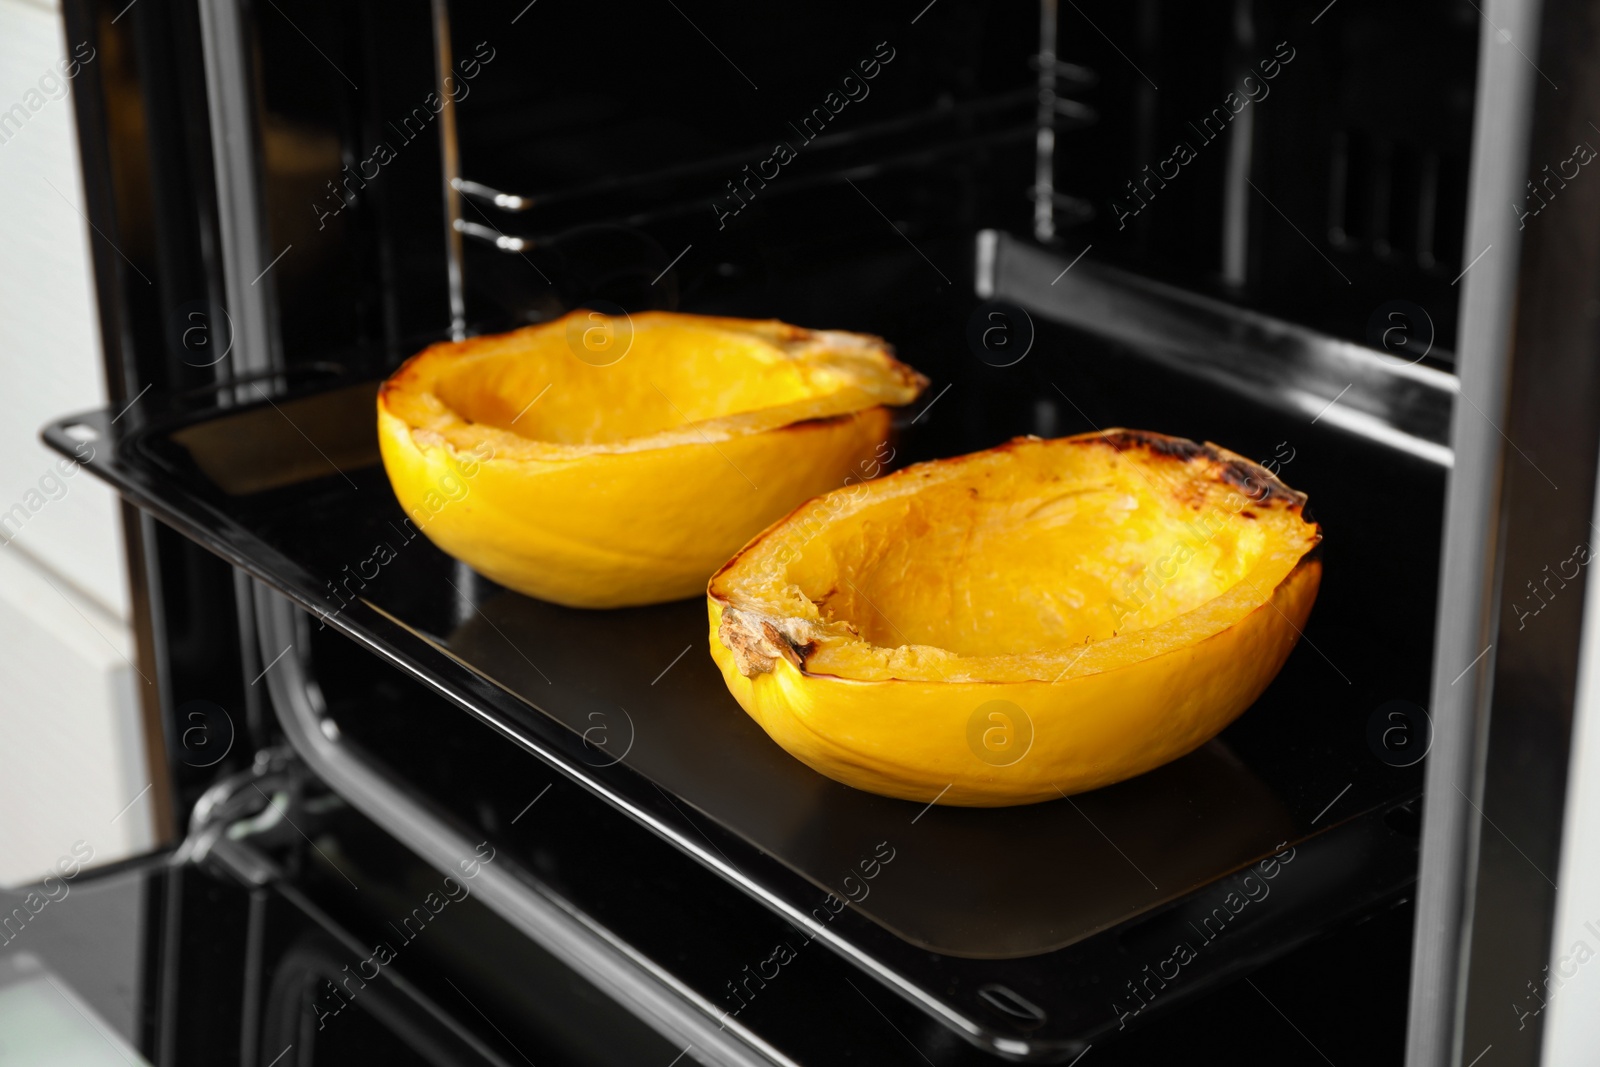 Photo of Baking sheet with halves of cooked spaghetti squash in oven